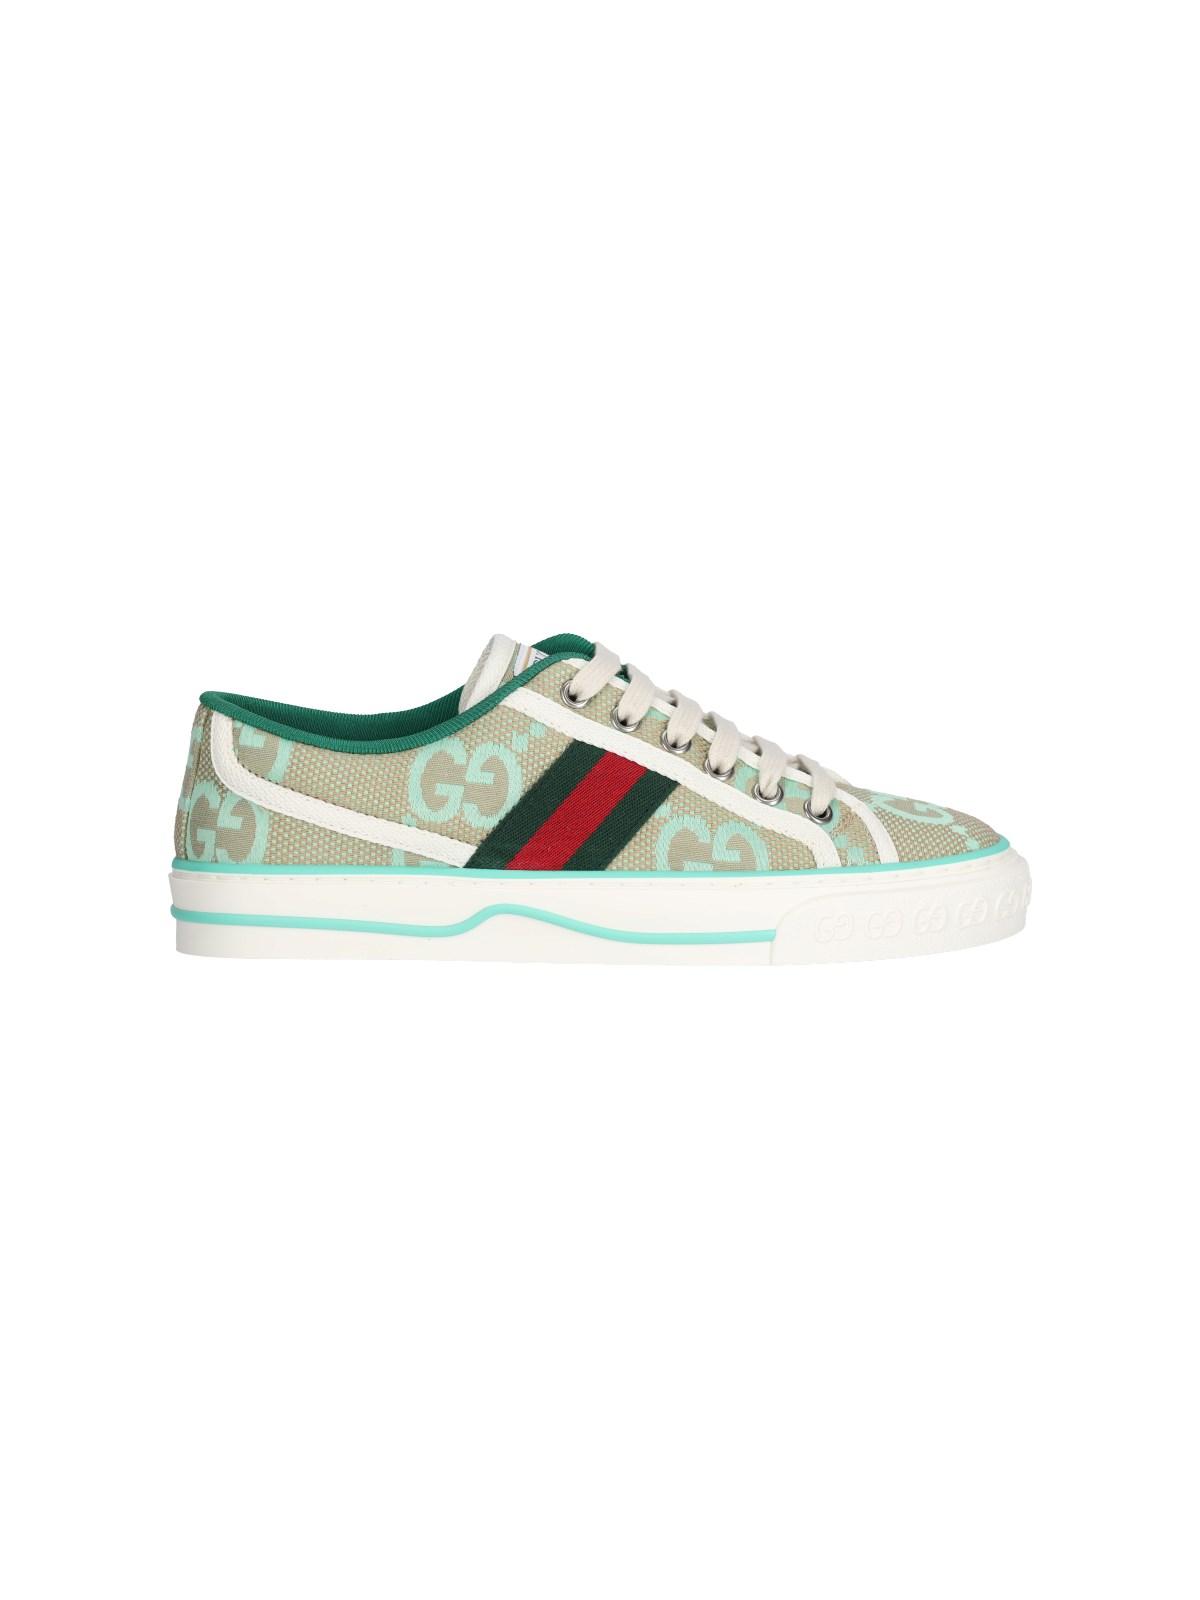 Gucci "tennis 1977" Low Top Sneakers in Green | Lyst